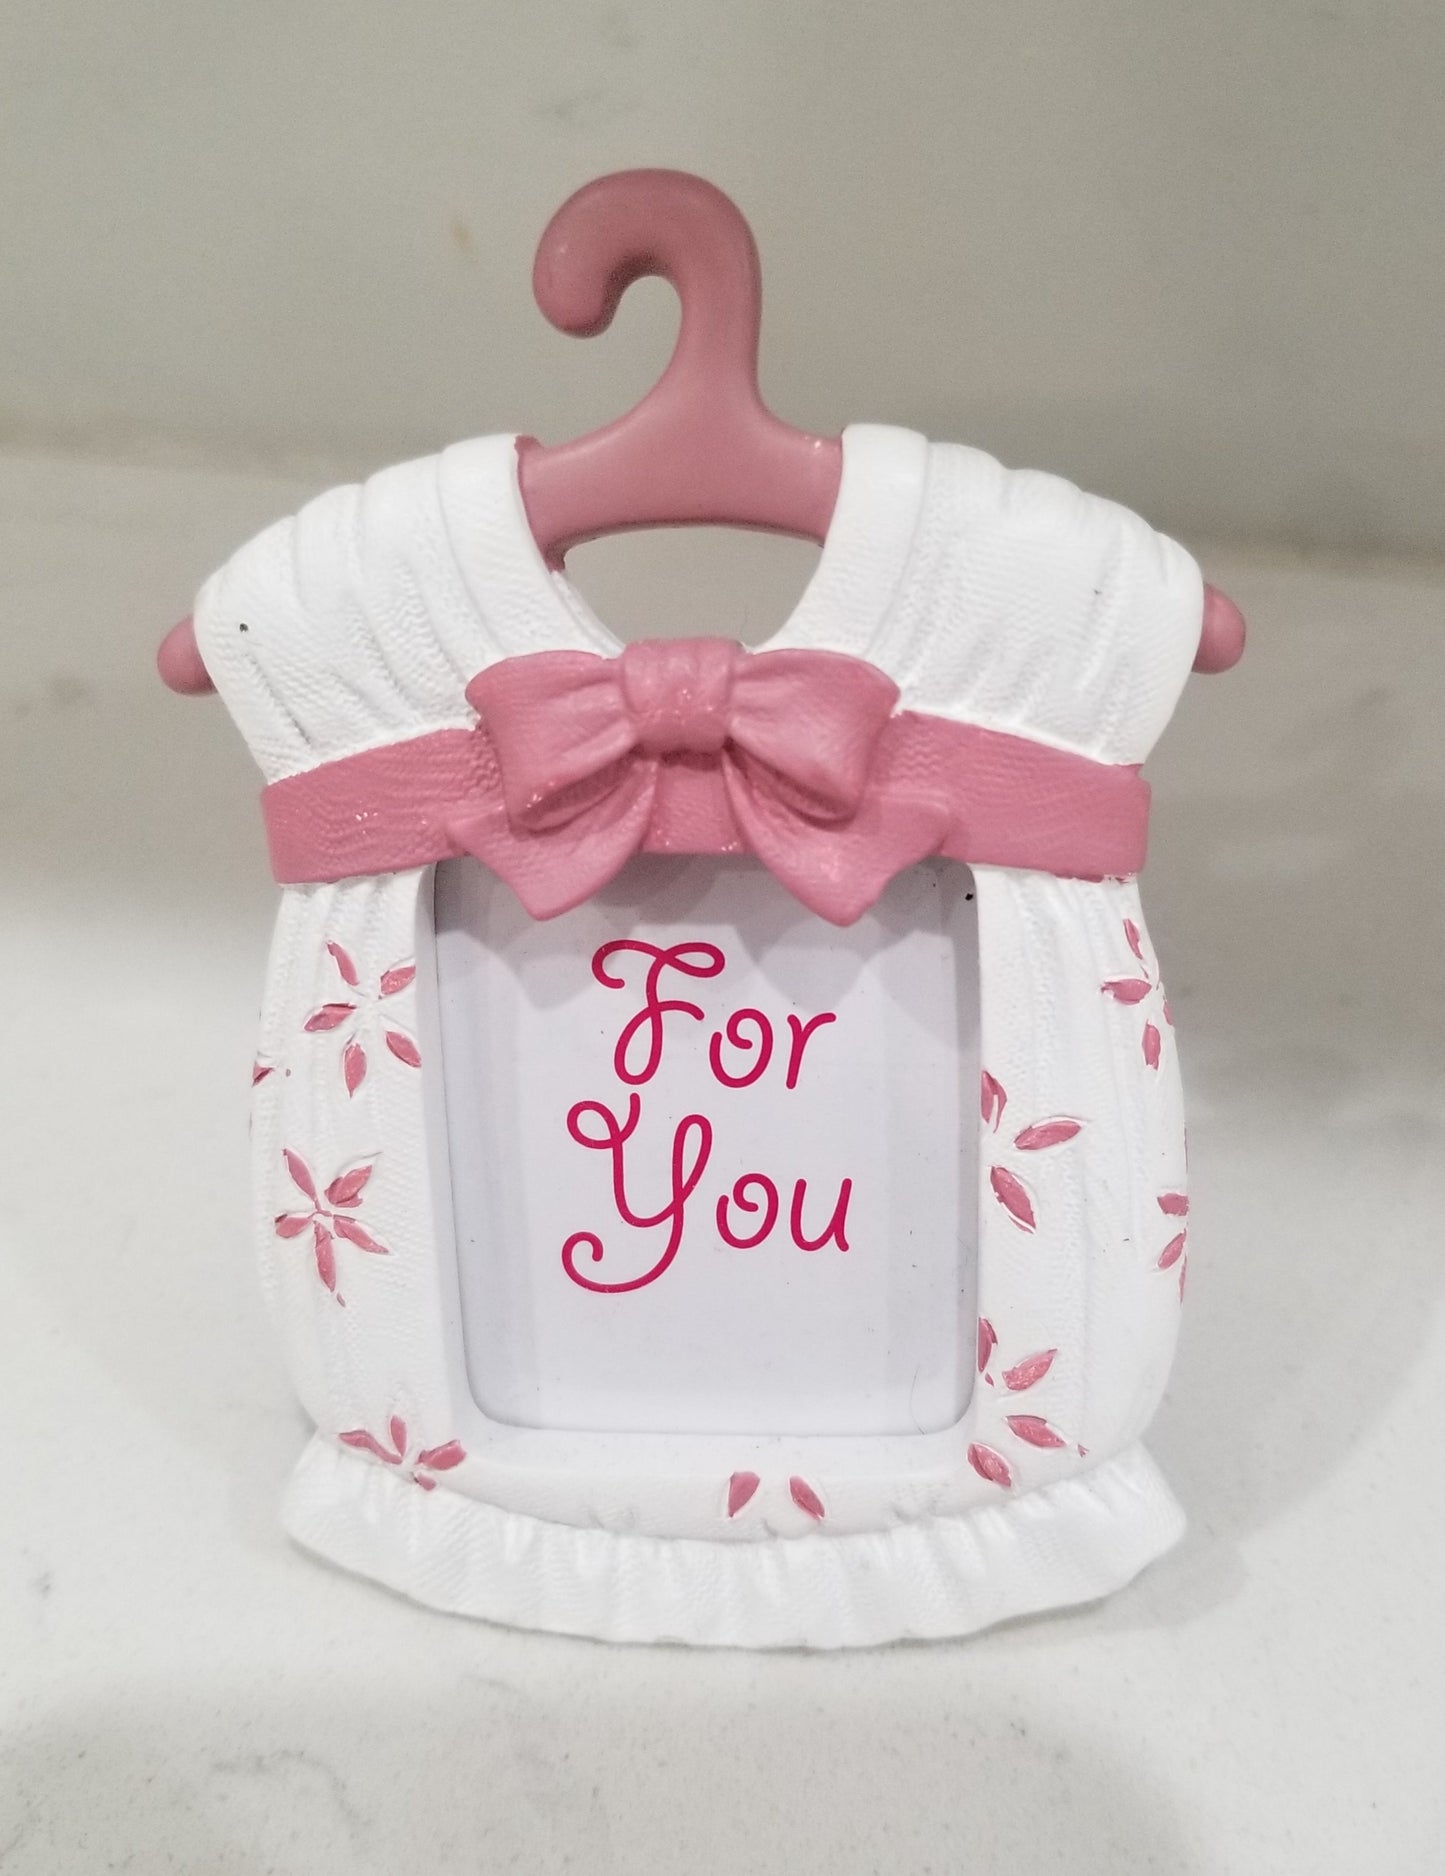 Cute baby themed photo frame favors - girl